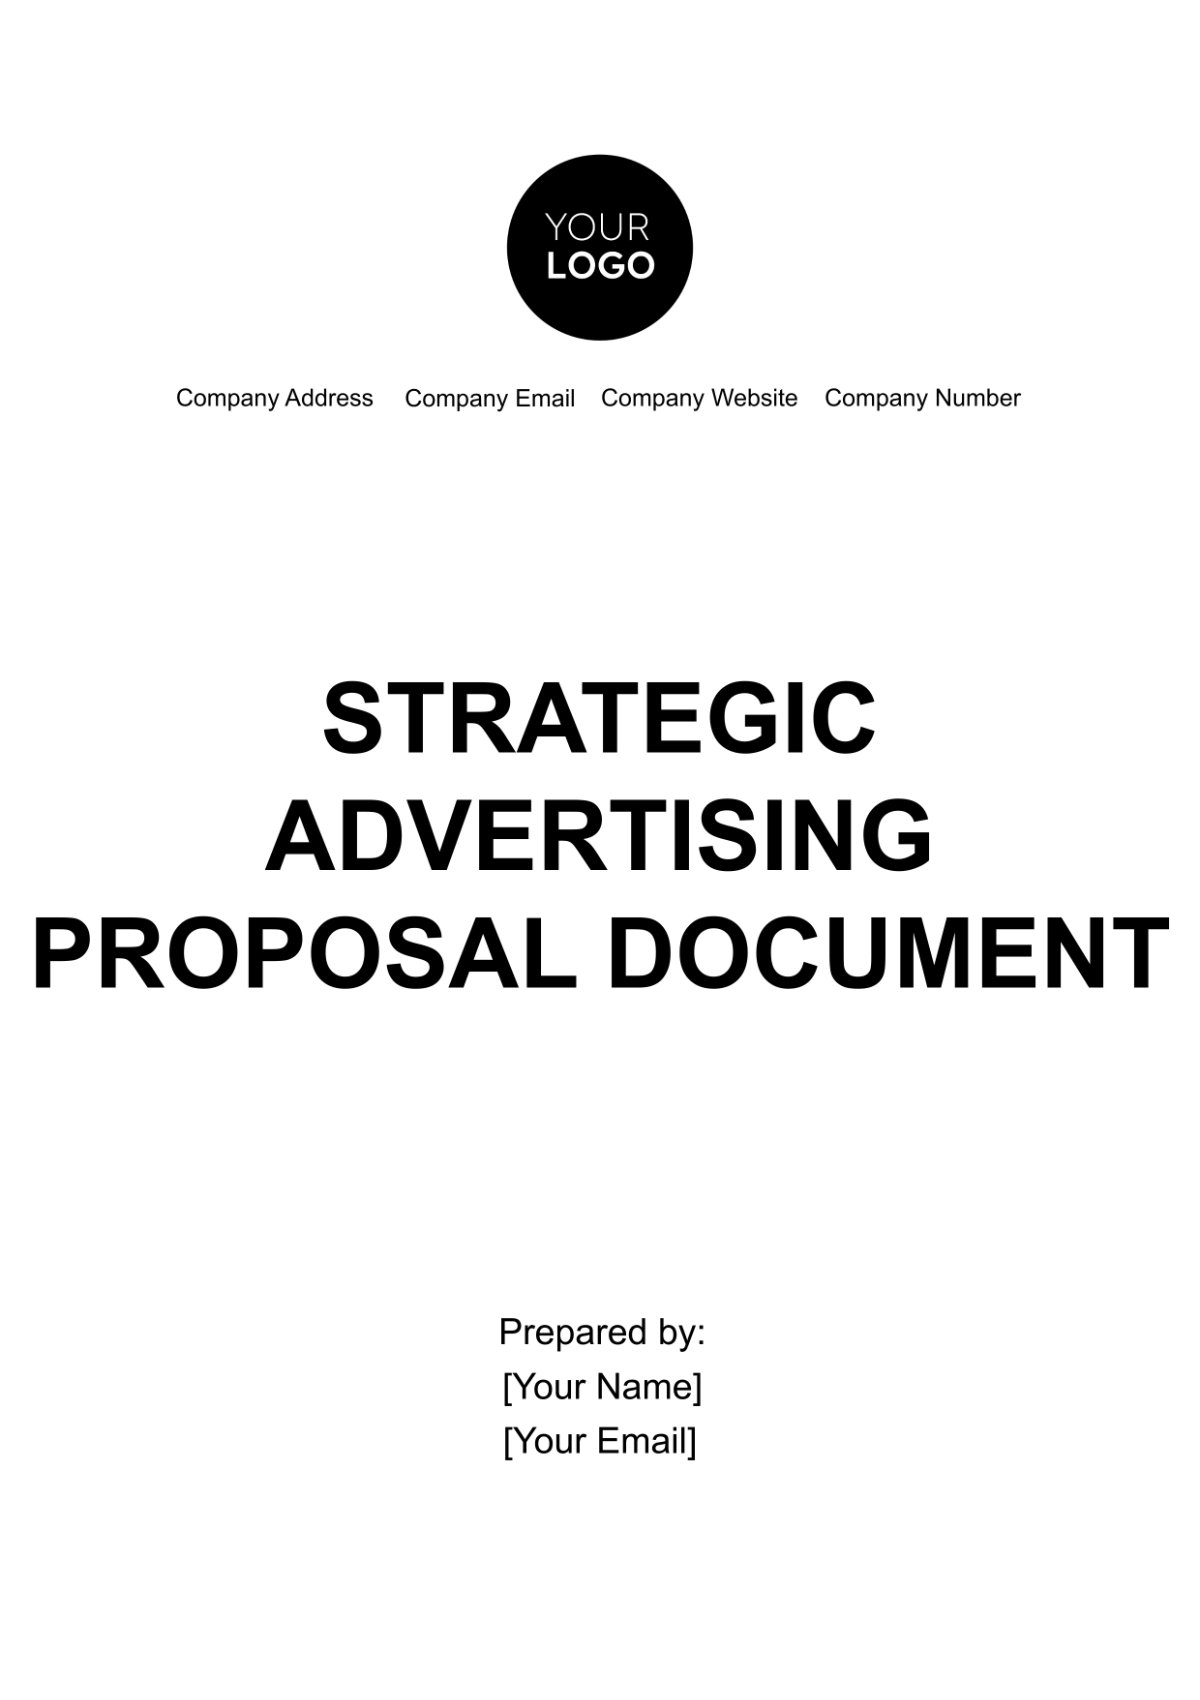 Free Strategic Advertising Proposal Document Template